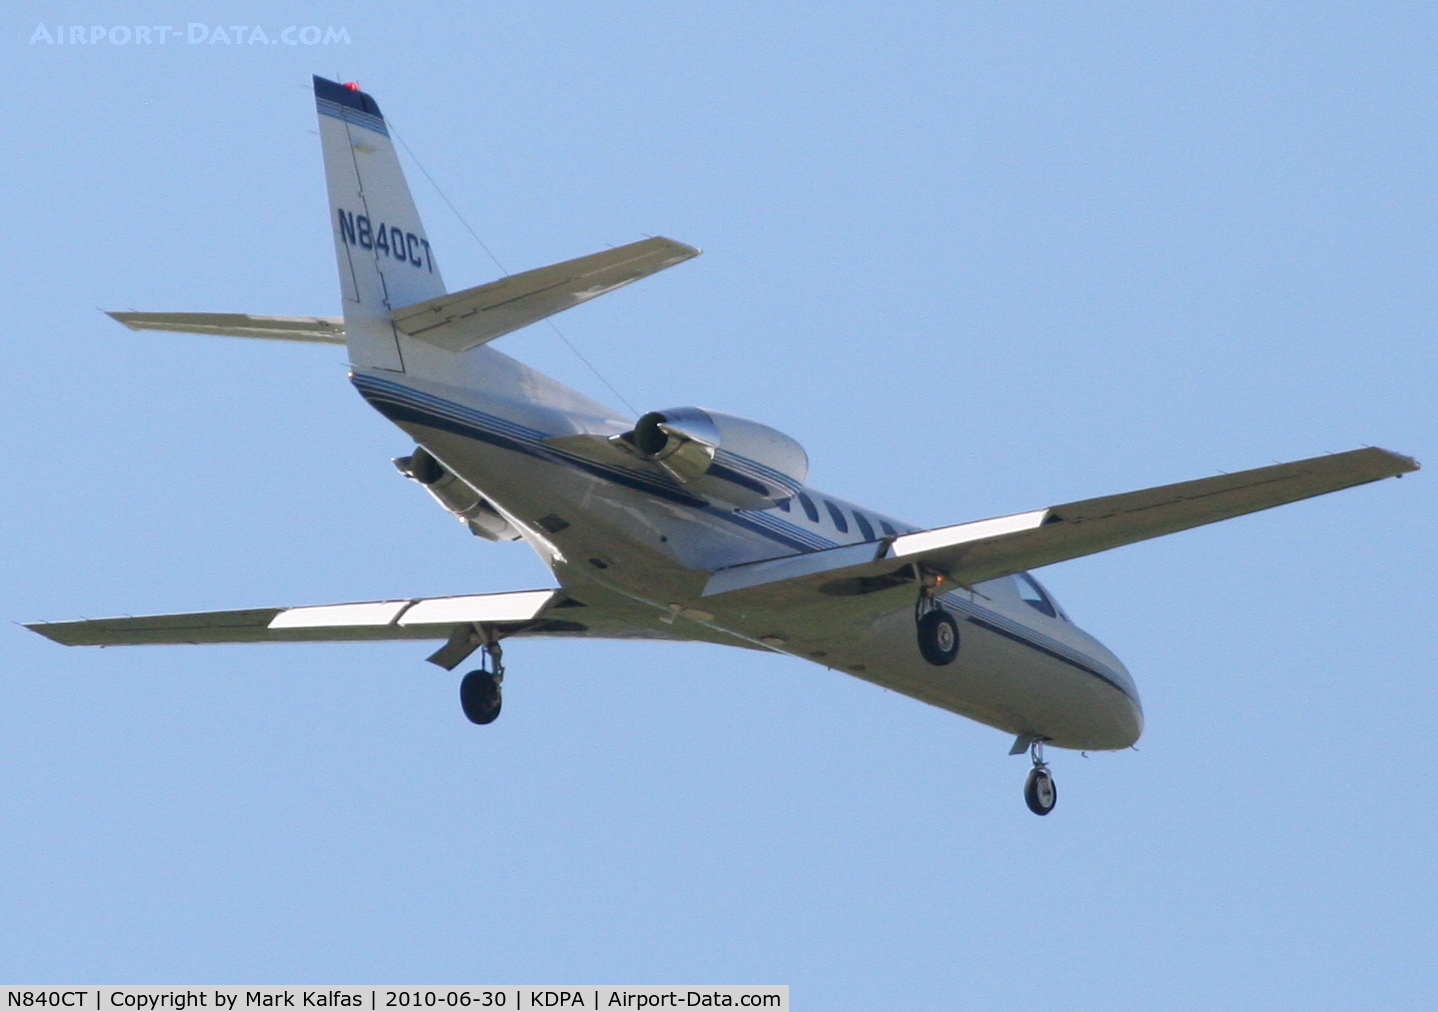 N840CT, 1993 Cessna 560 C/N 560-0236, EMERSON CLIMATE TECHNOLOGIES INC Cessna 560 Citation Ultra, N840CT on approach to RWY 2L KDPA.